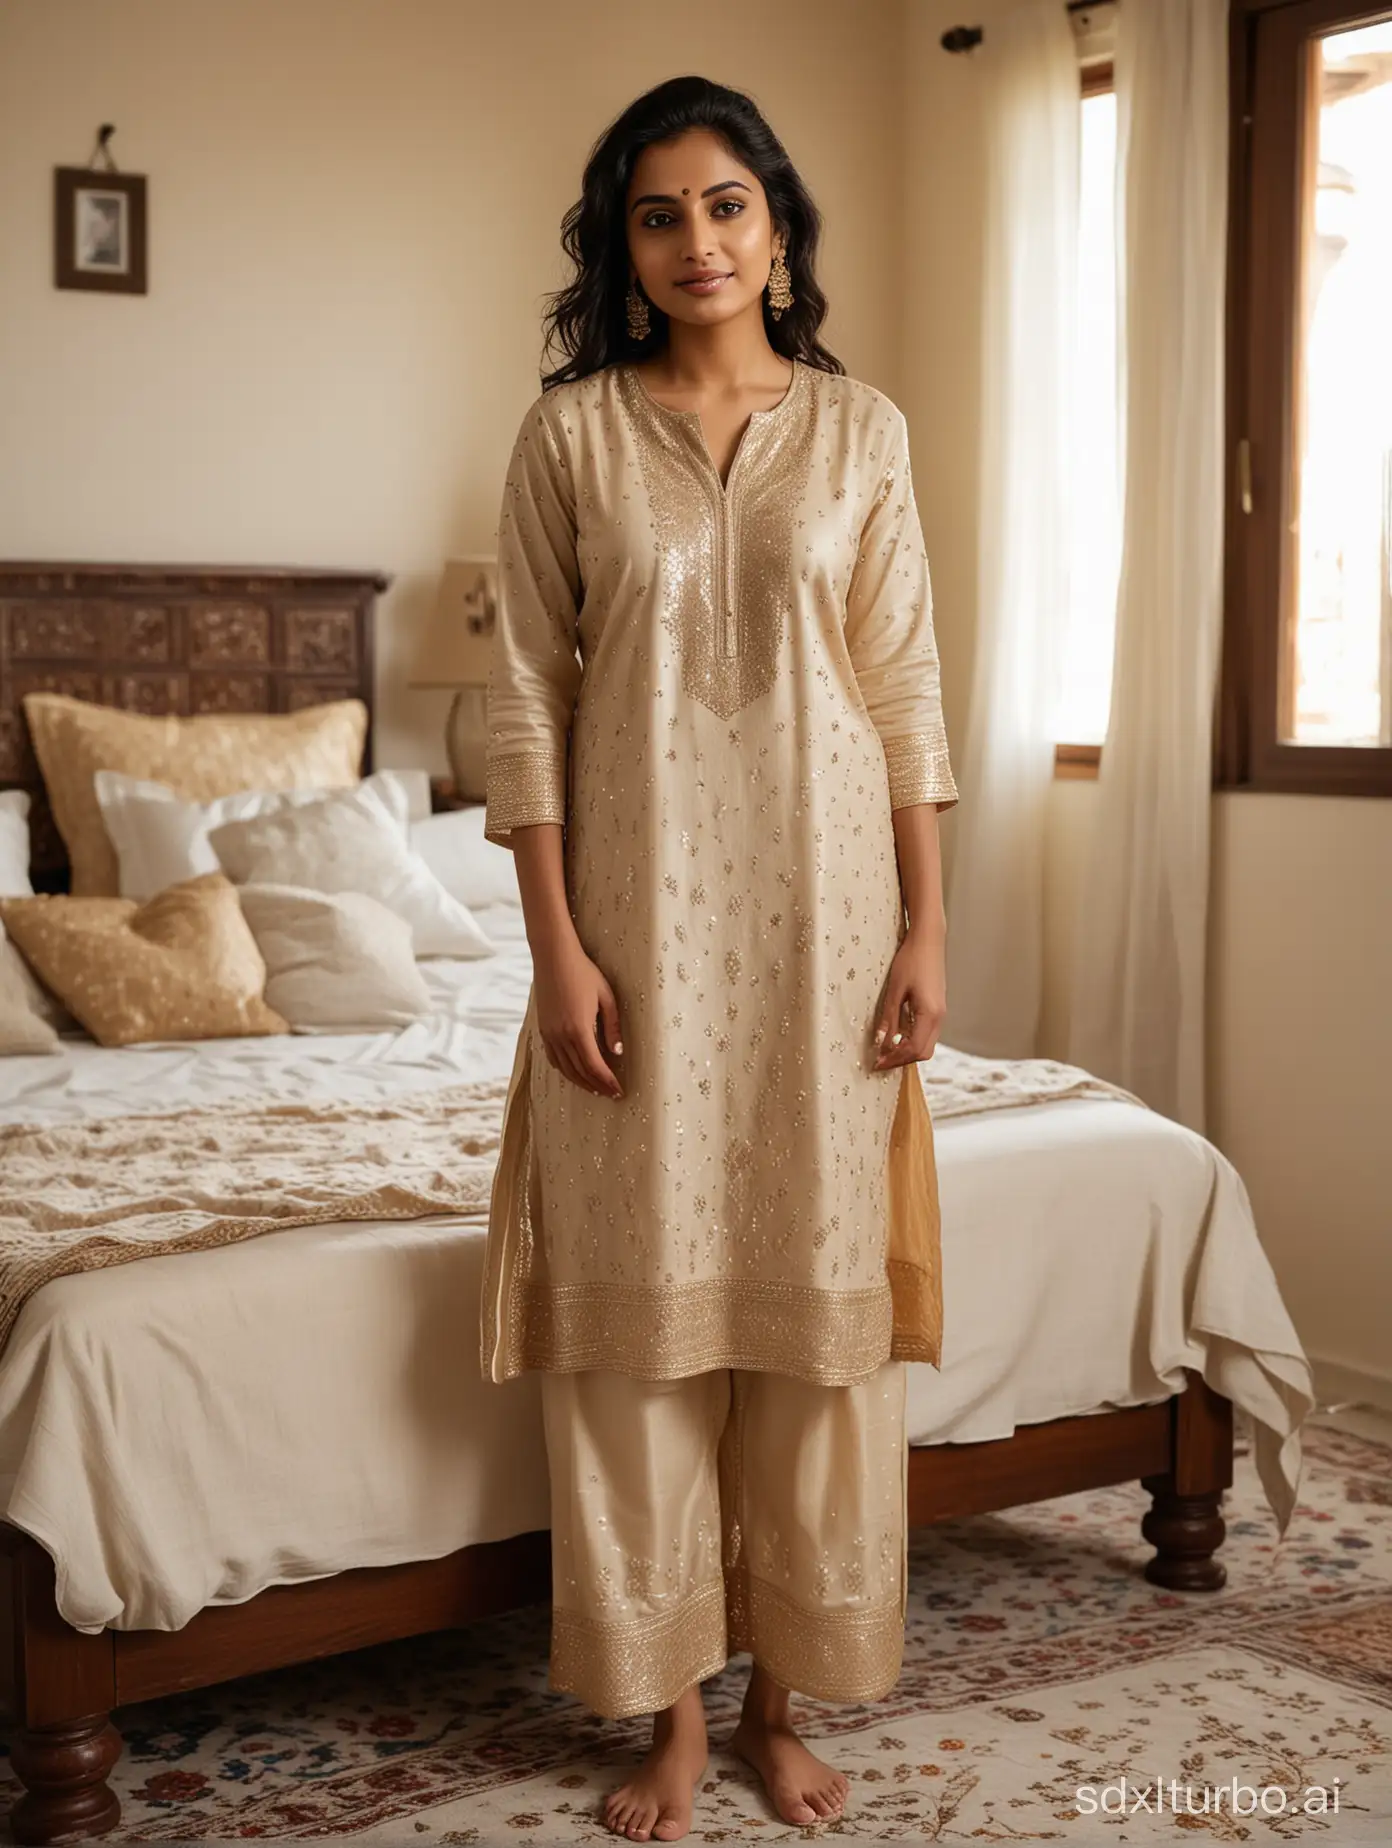 Indian-Woman-in-Traditional-SequinEmbroidered-Kurta-Set-with-Photorealistic-Room-Ambiance